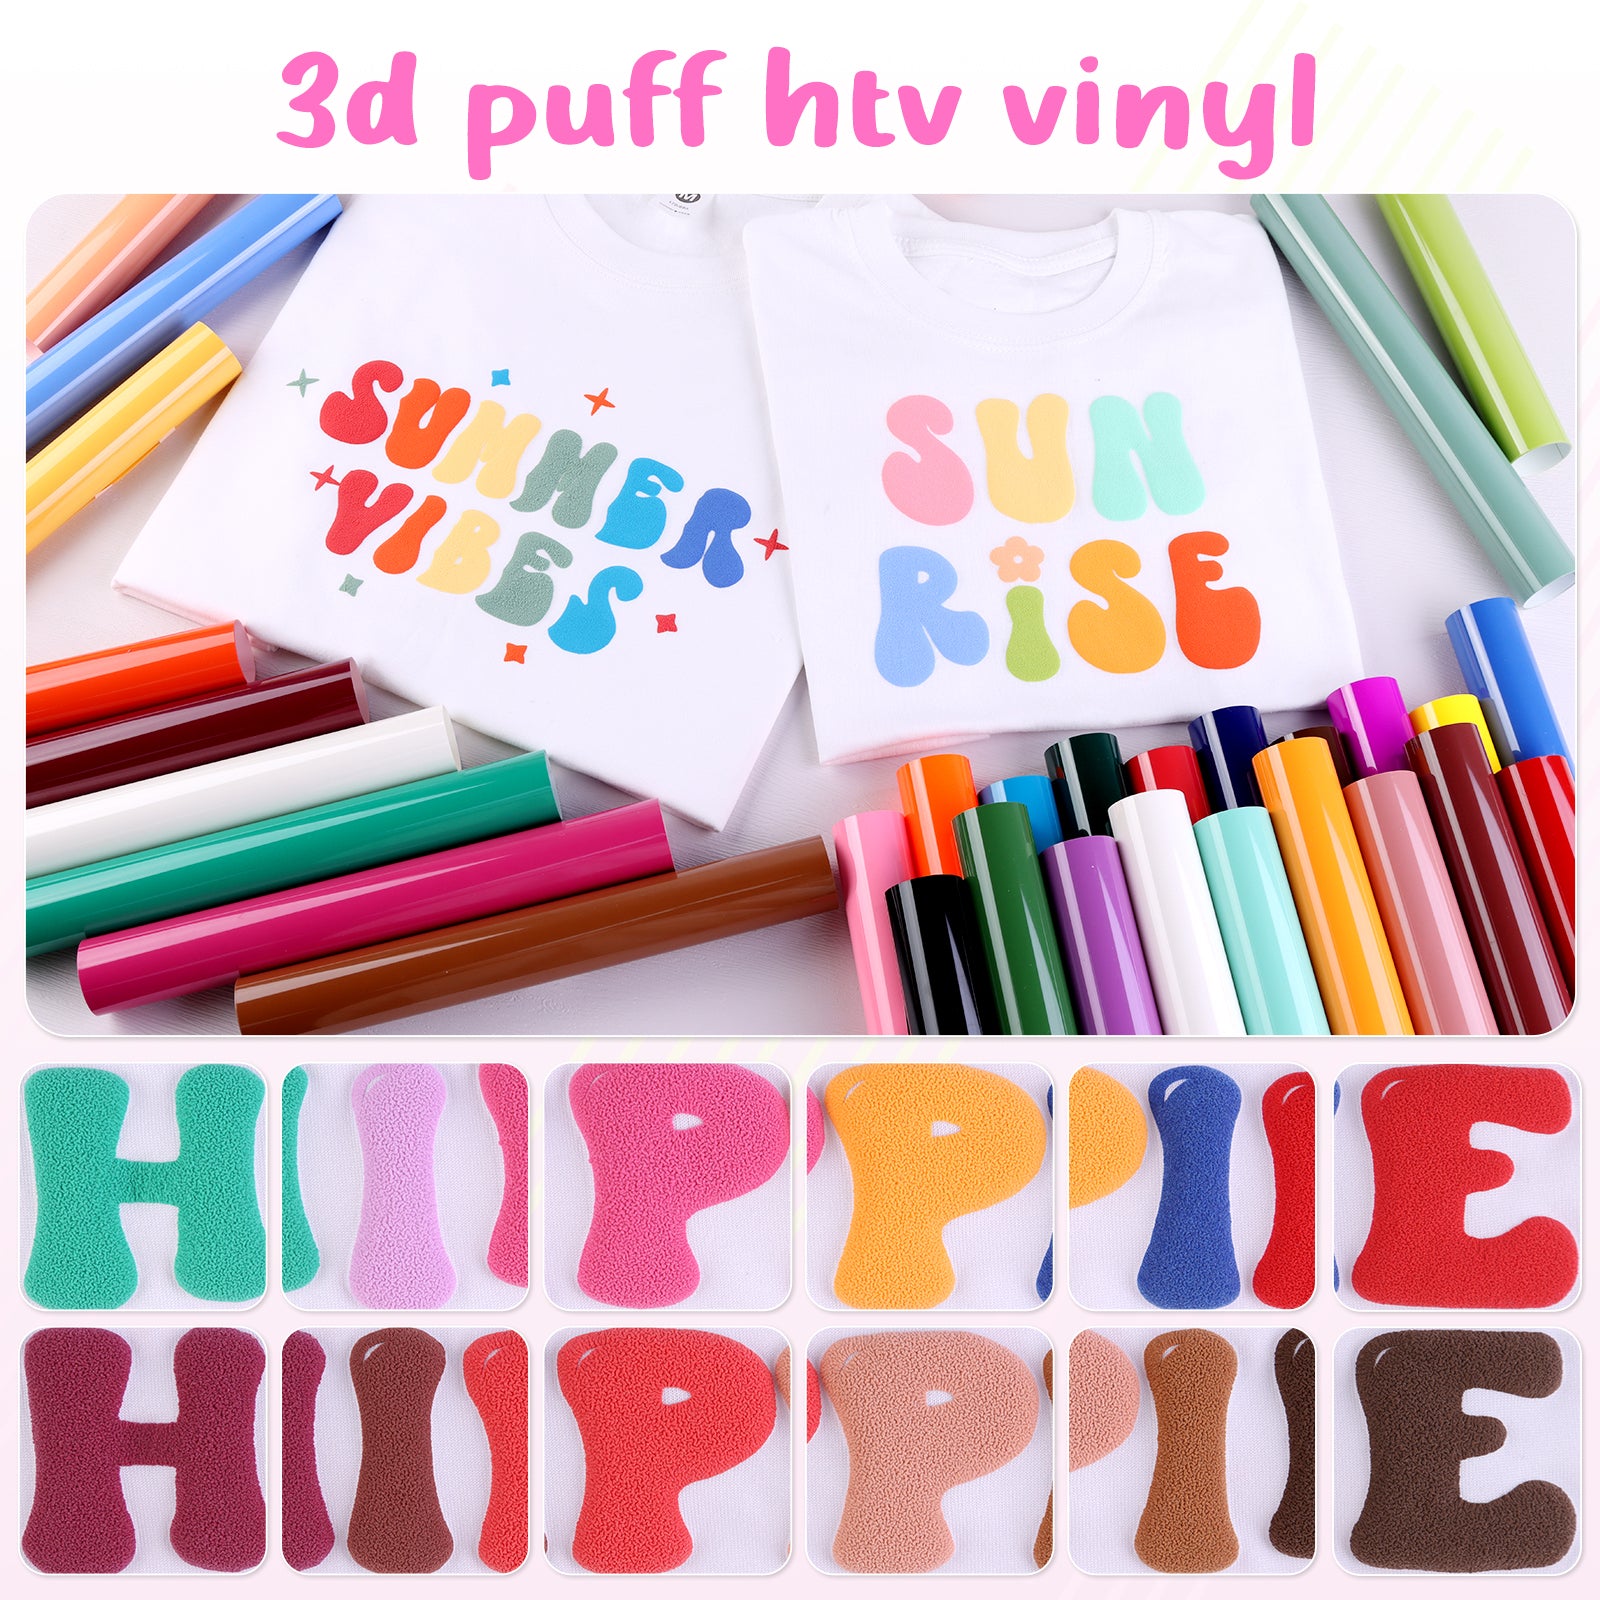 Tintnut 3D Puff Vinyl Heat Transfer - 10 Sheets 12inches X 10inches